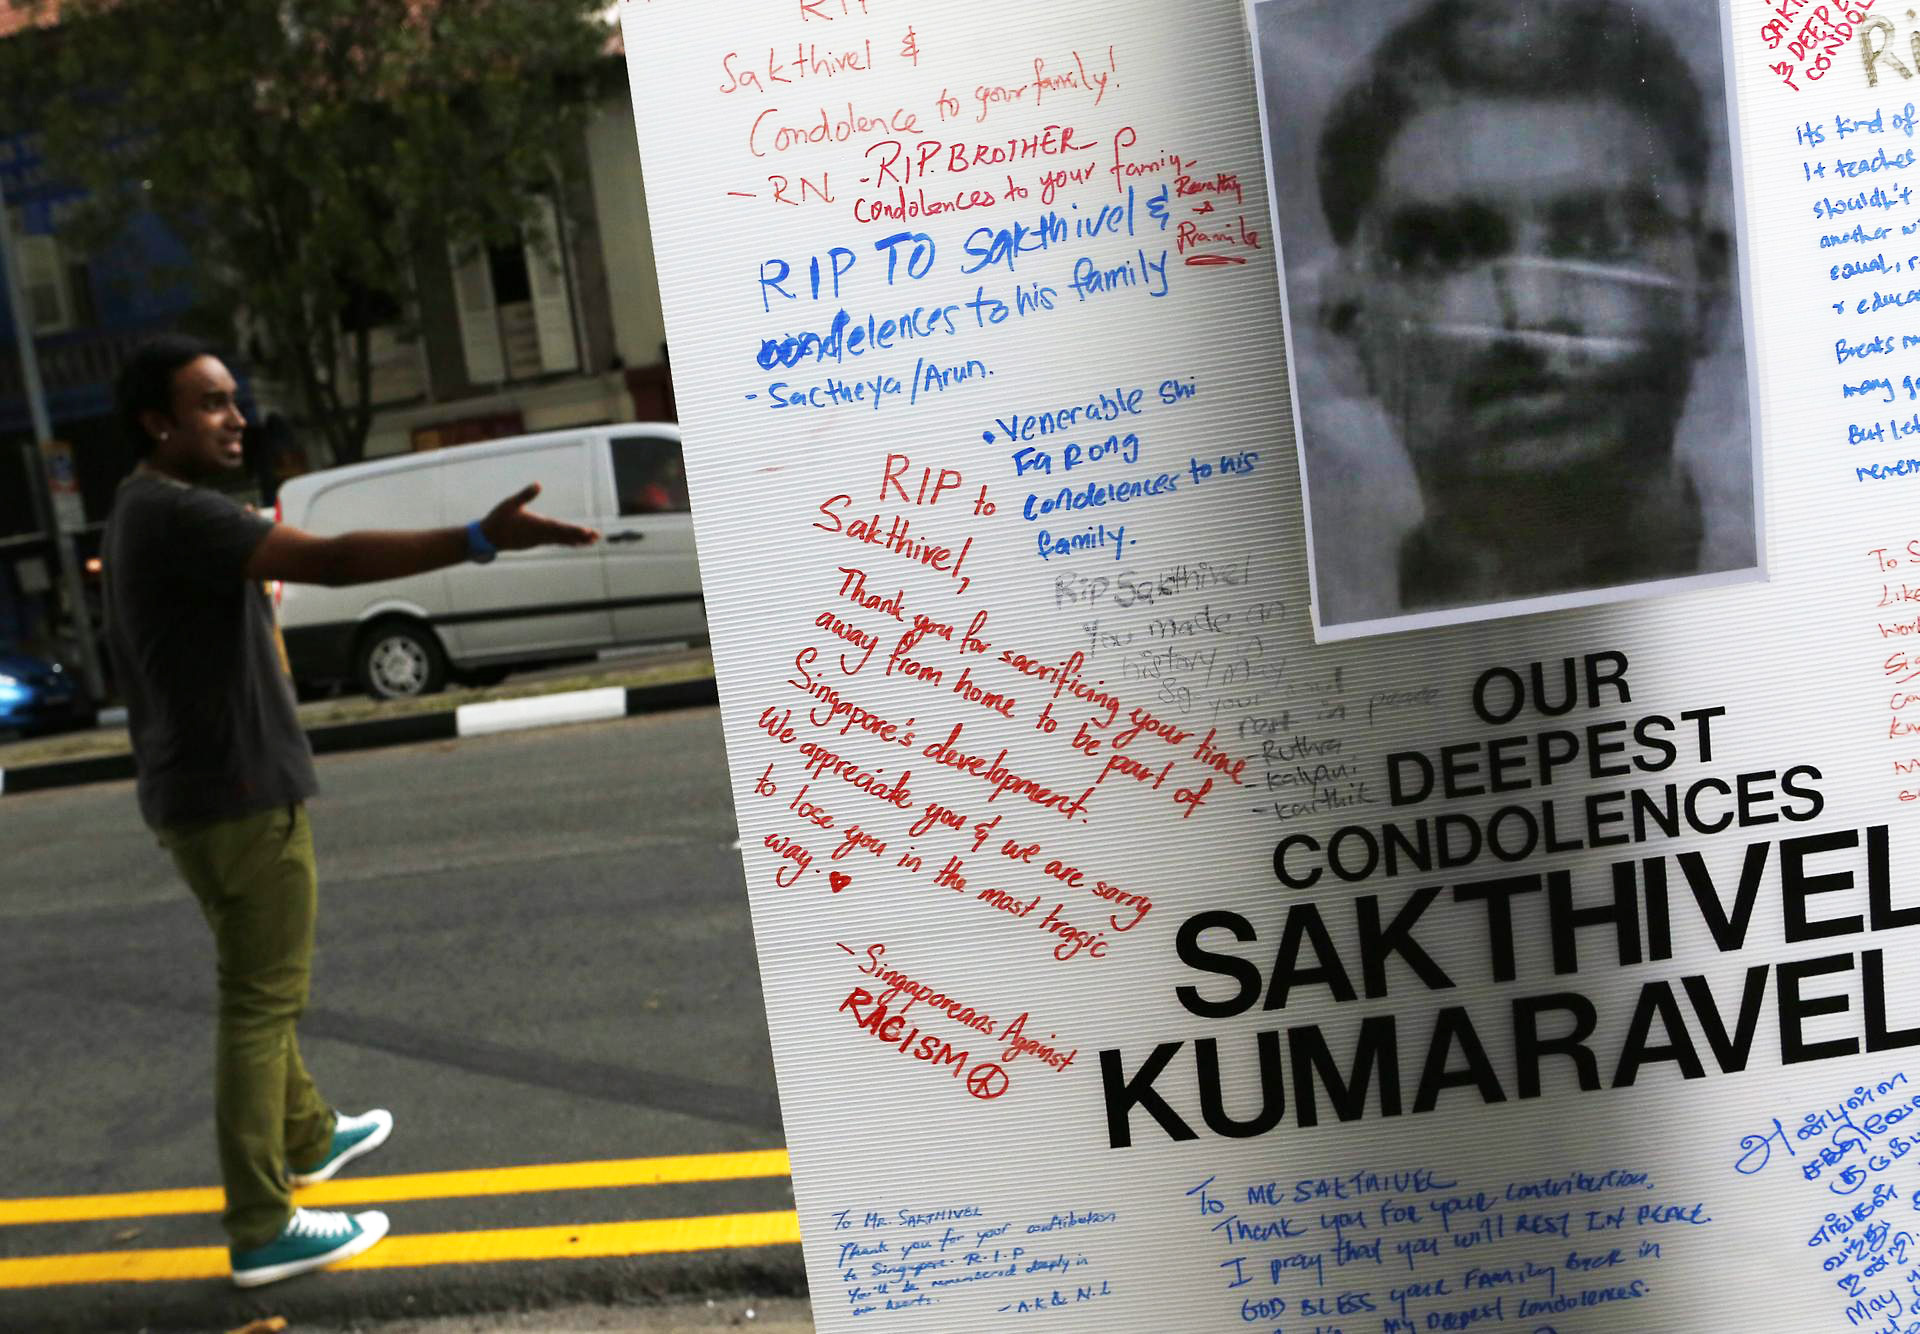 A man gestures behind a tribute board for Sakthivel Kumaravelu, an Indian national who was killed when he was struck by a bus, sparking a riot in the Little India district of Singapore. Photo: EPA